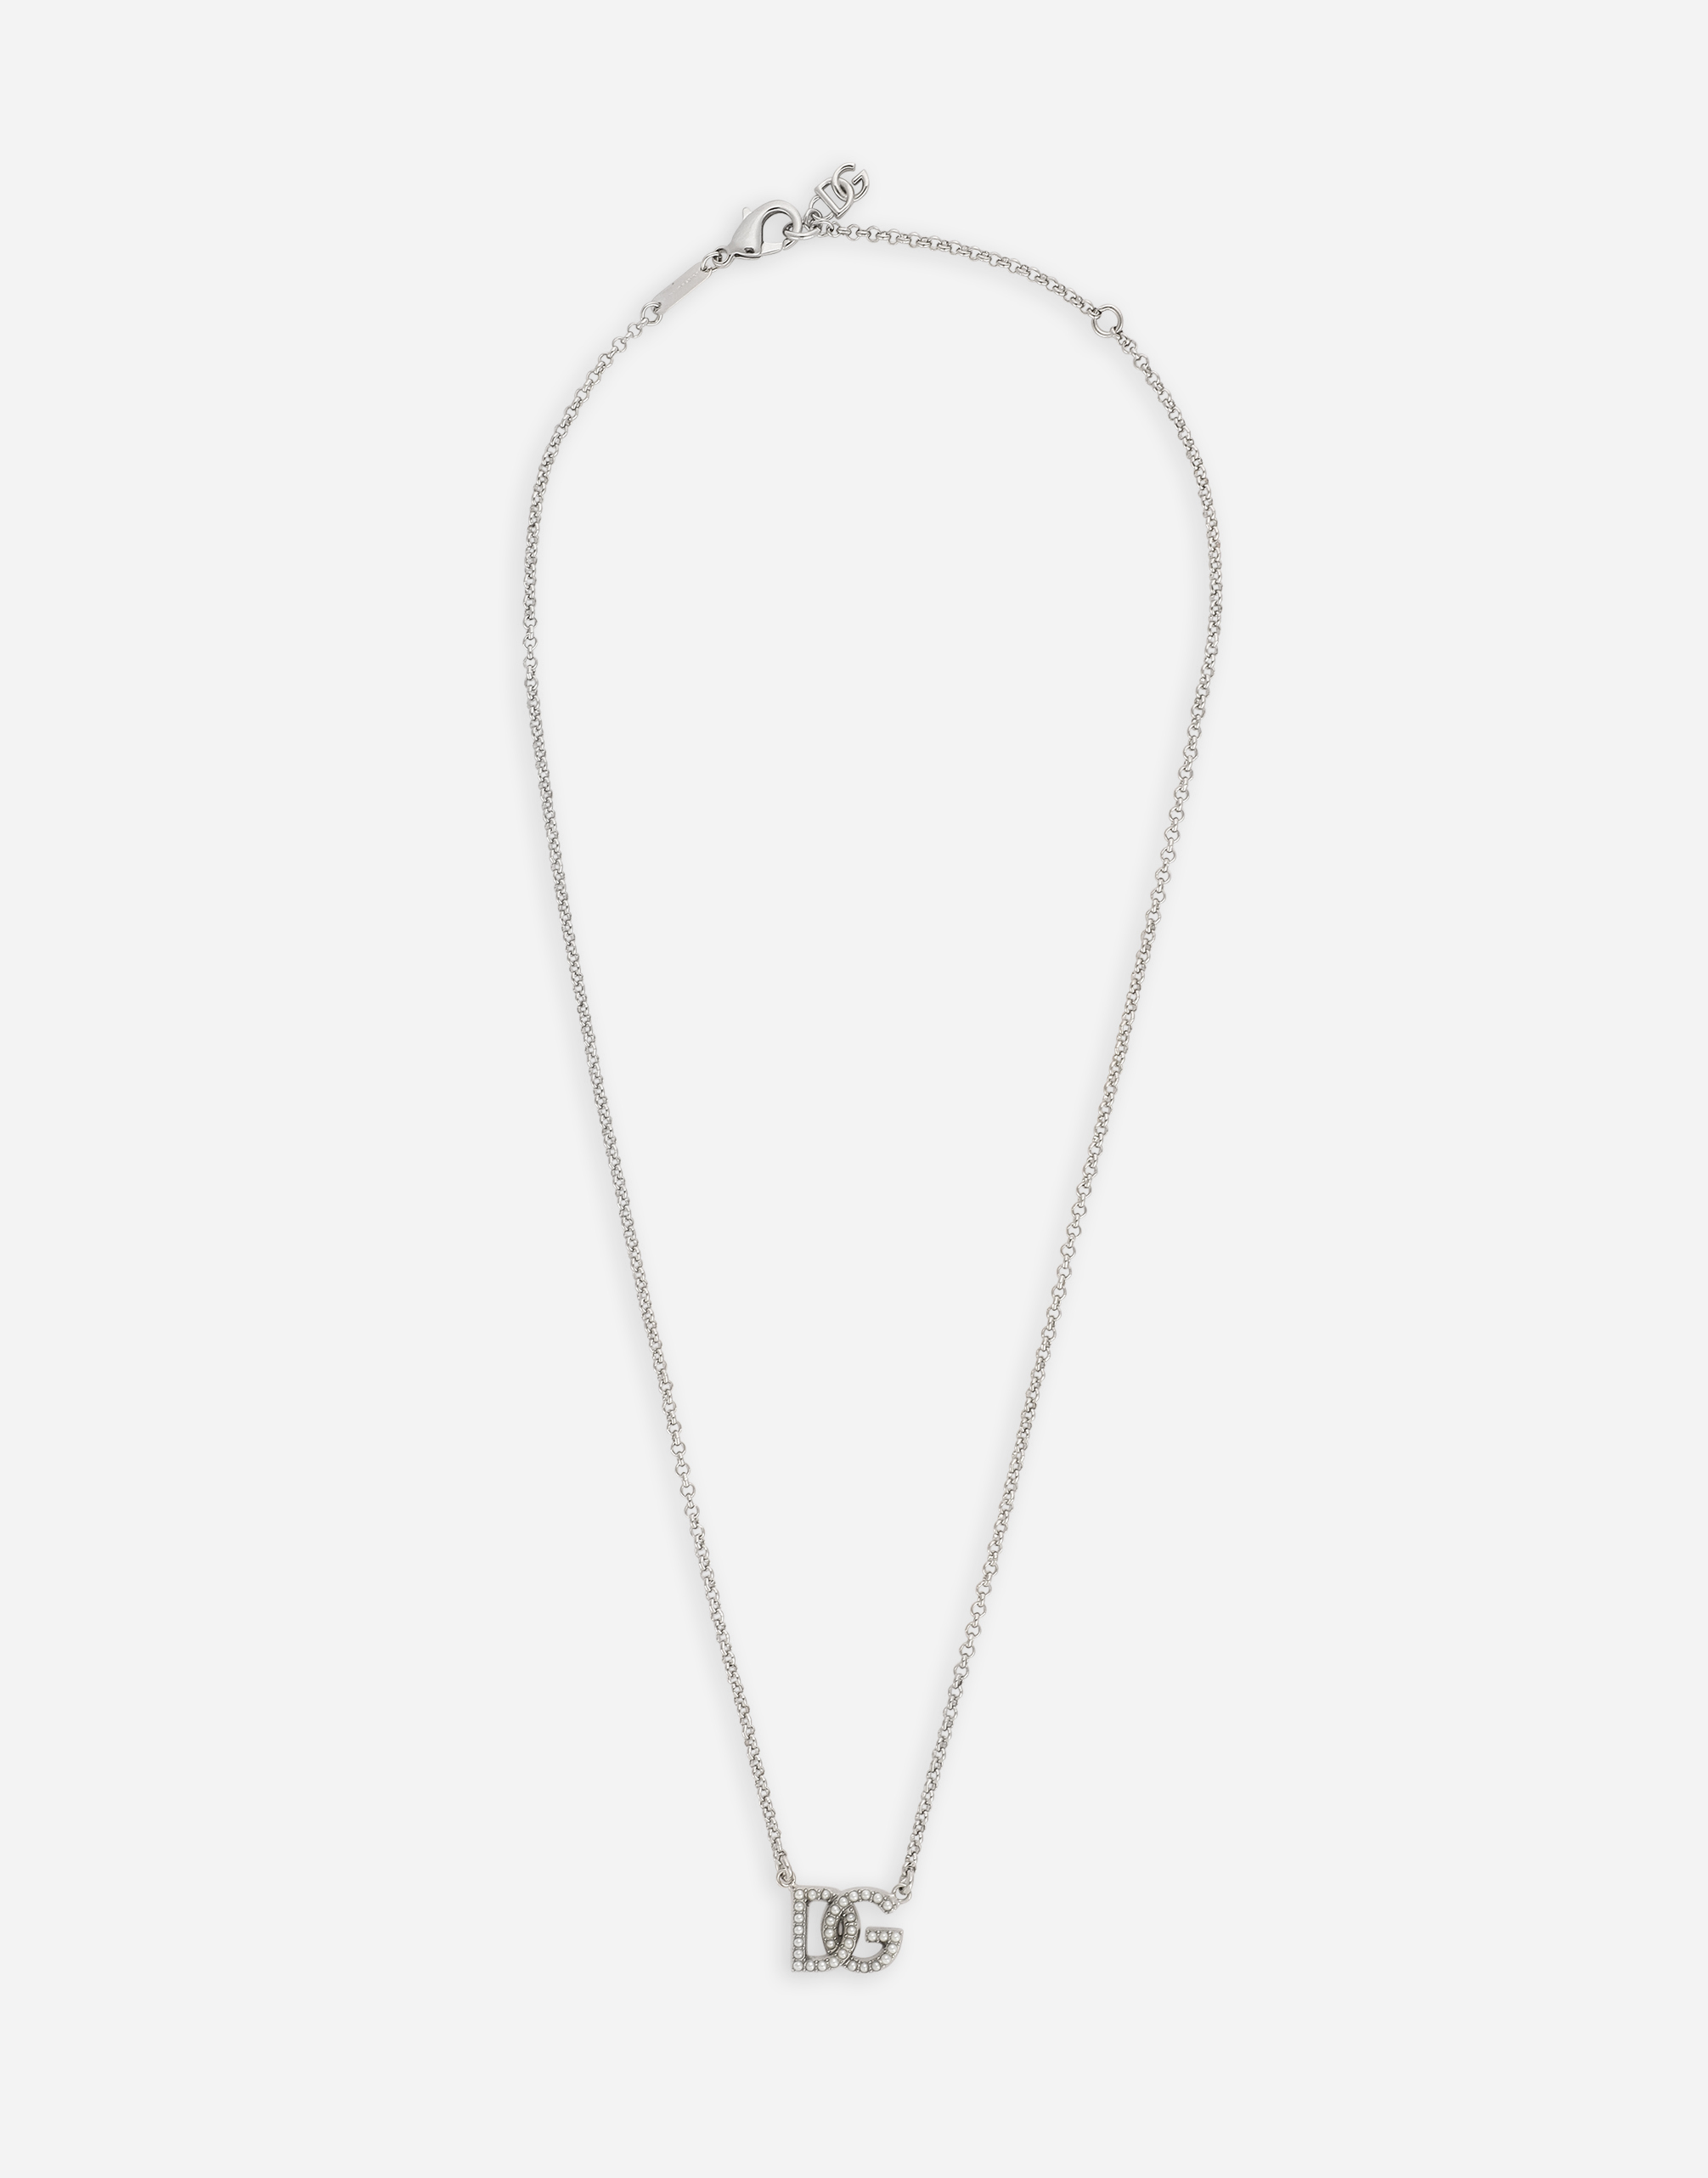 Chain necklace with DG logo in Silver